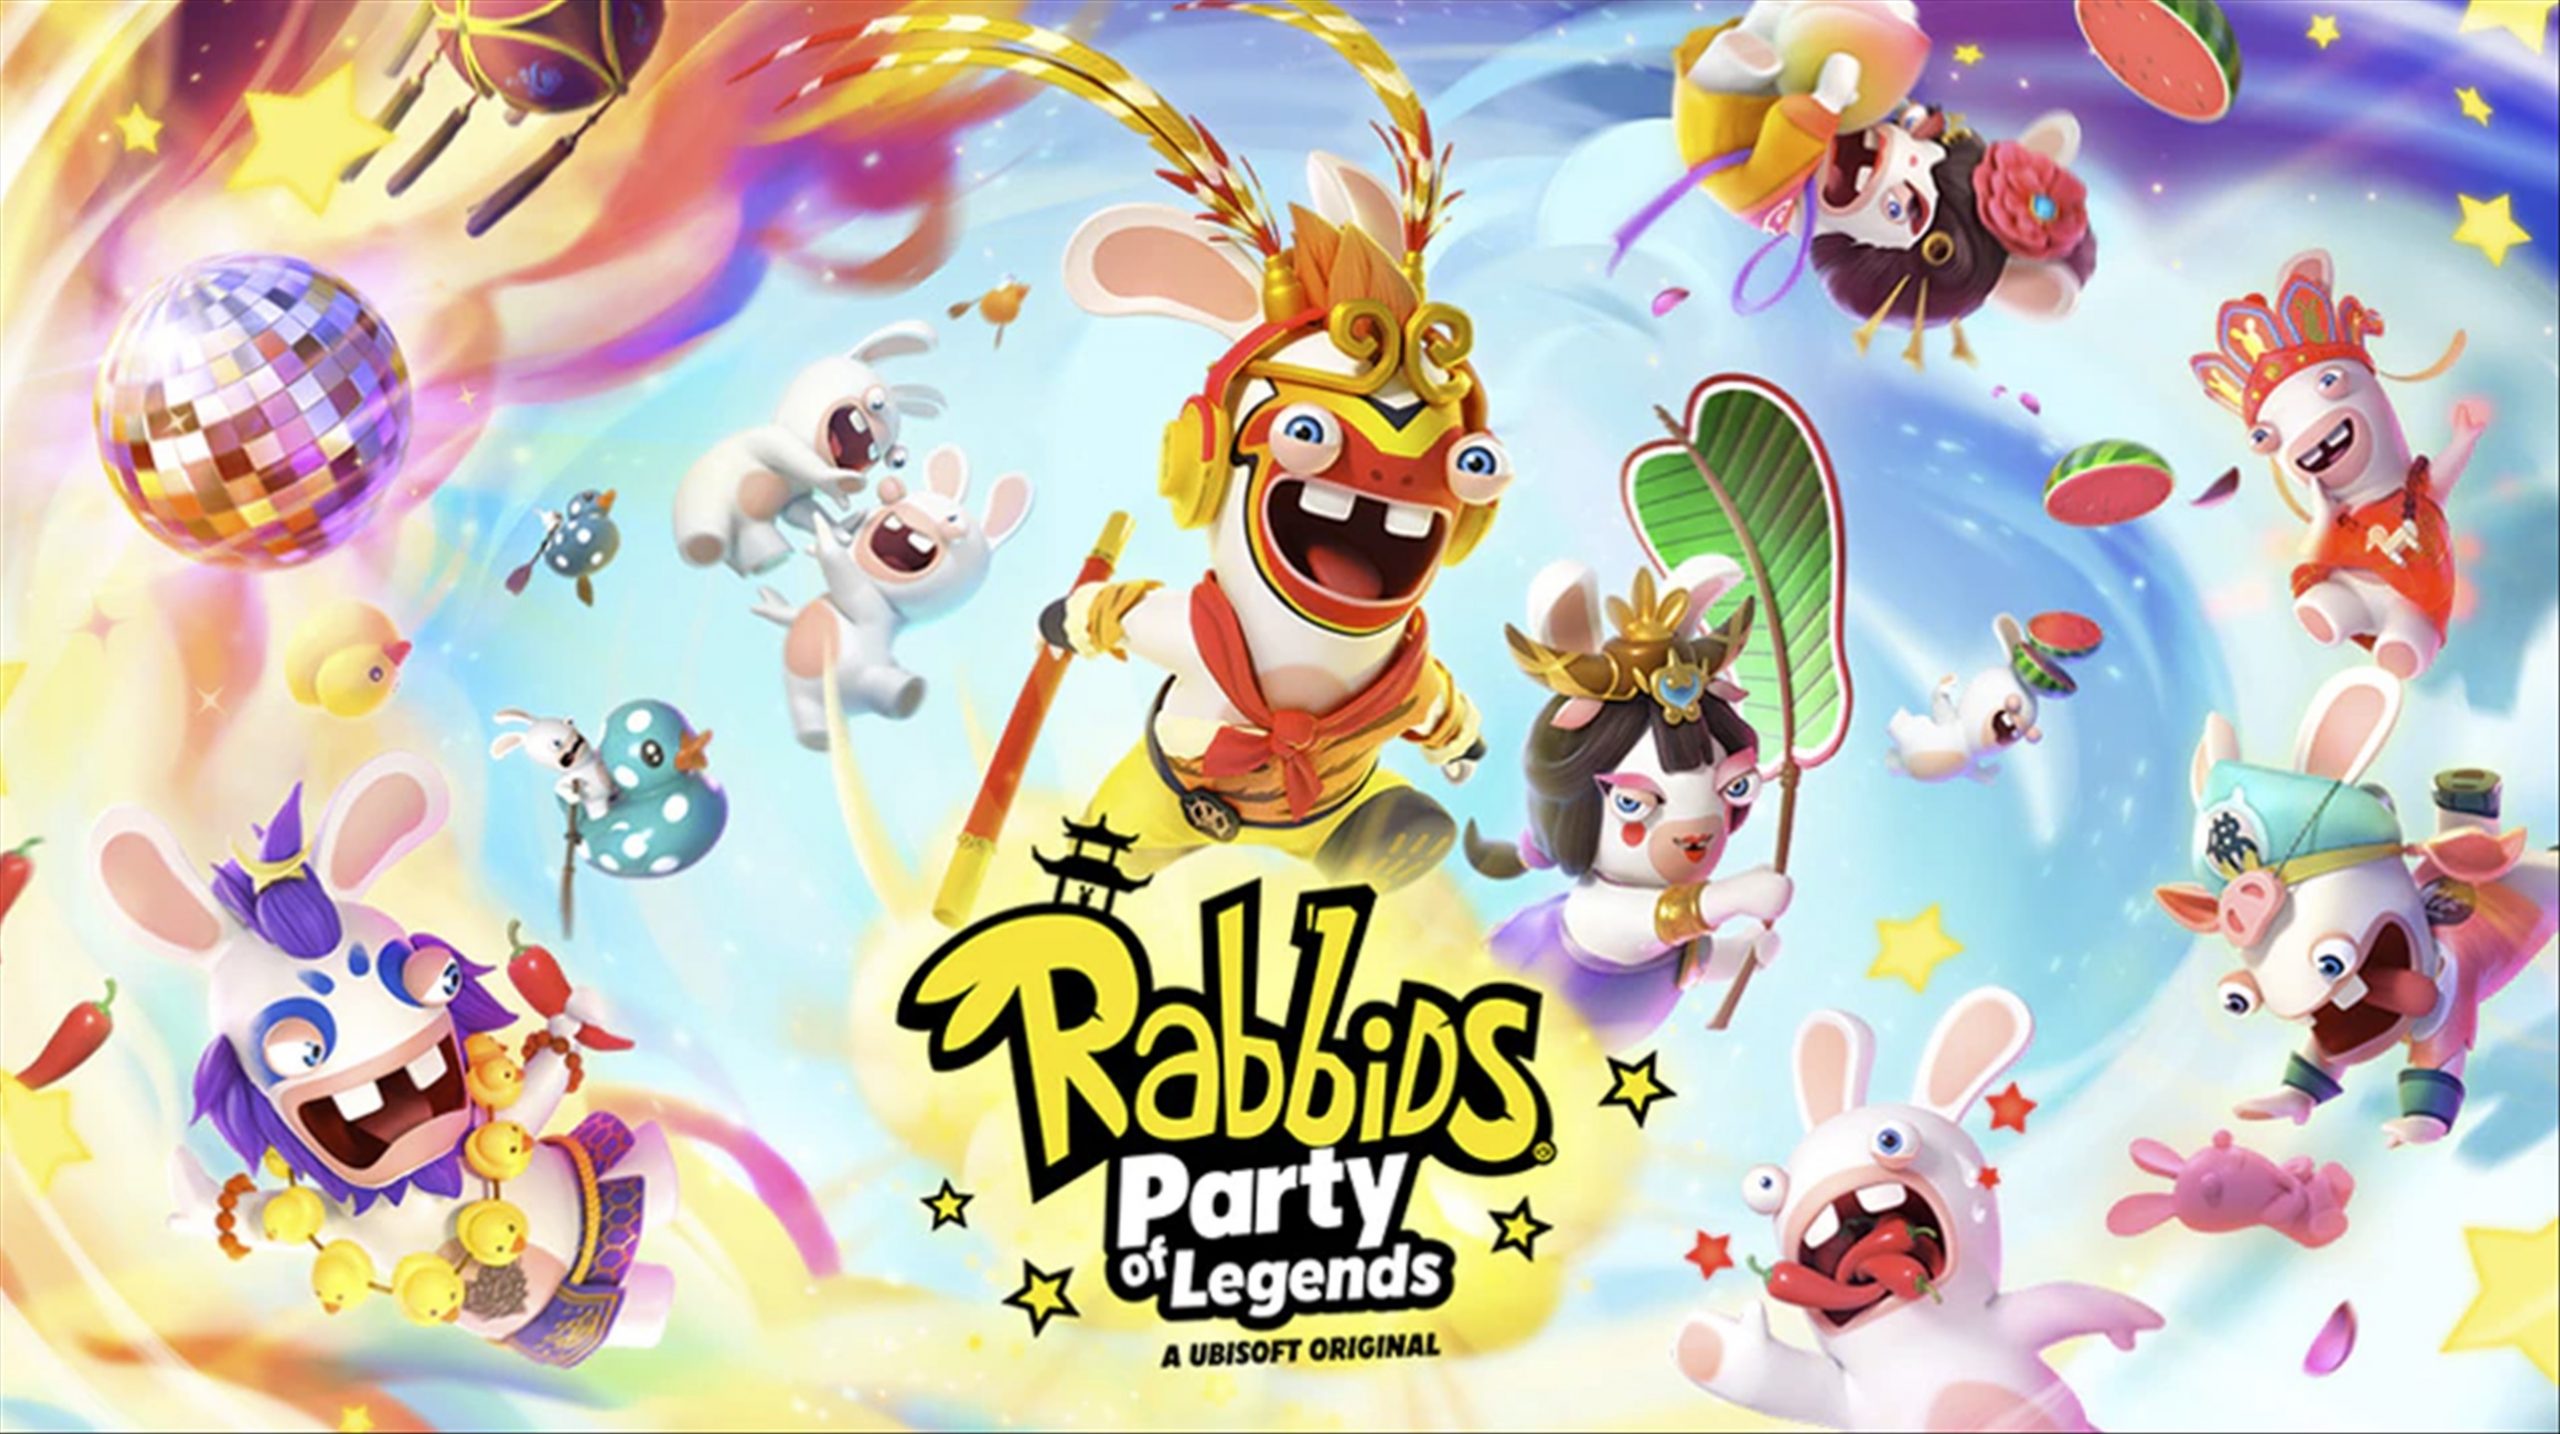 Best party game for Nintendo Switch – Rabbids: Party of Legends Review